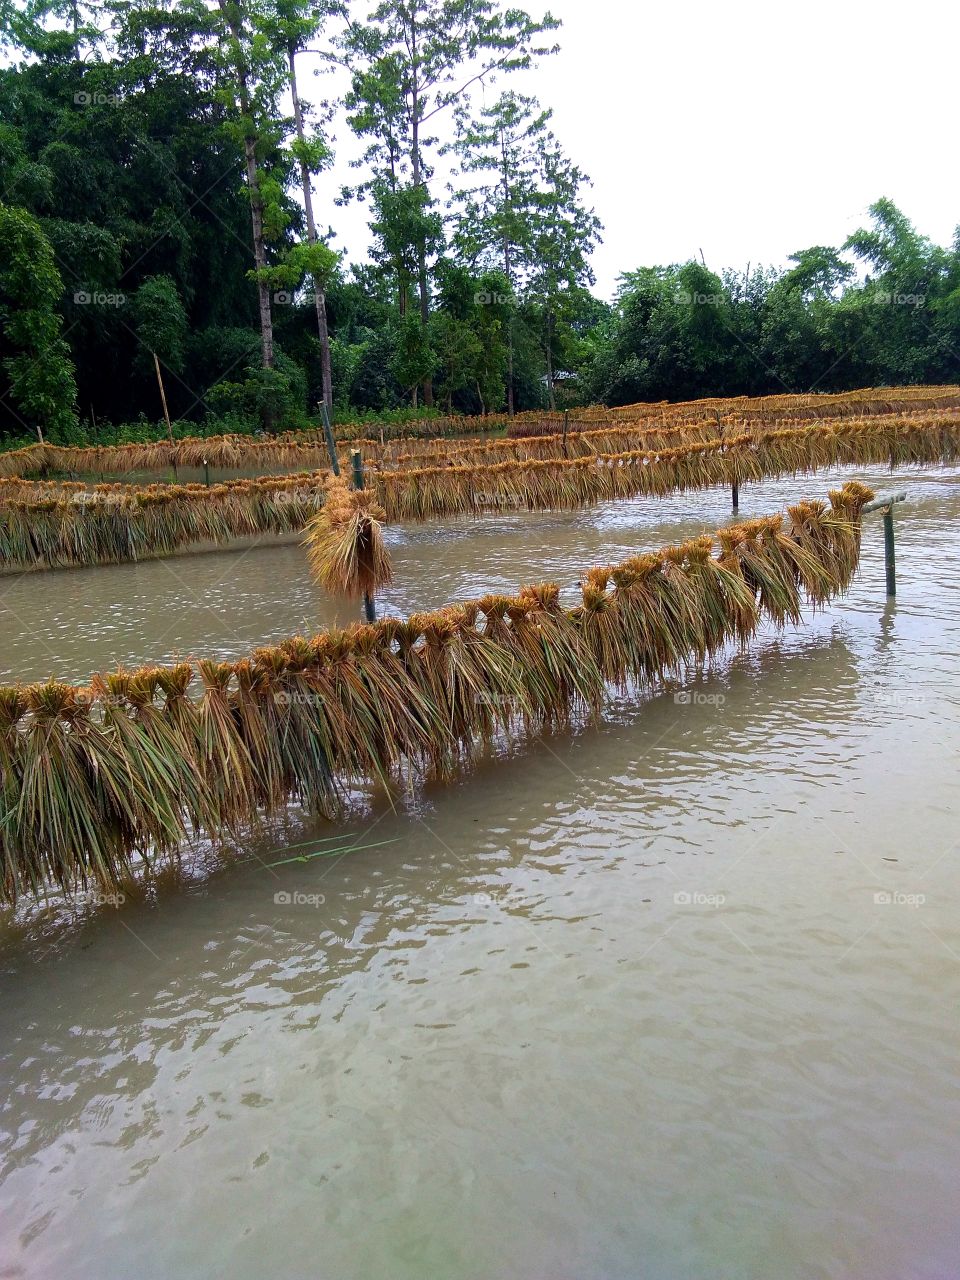 Hanging rice on logs to dry on the river